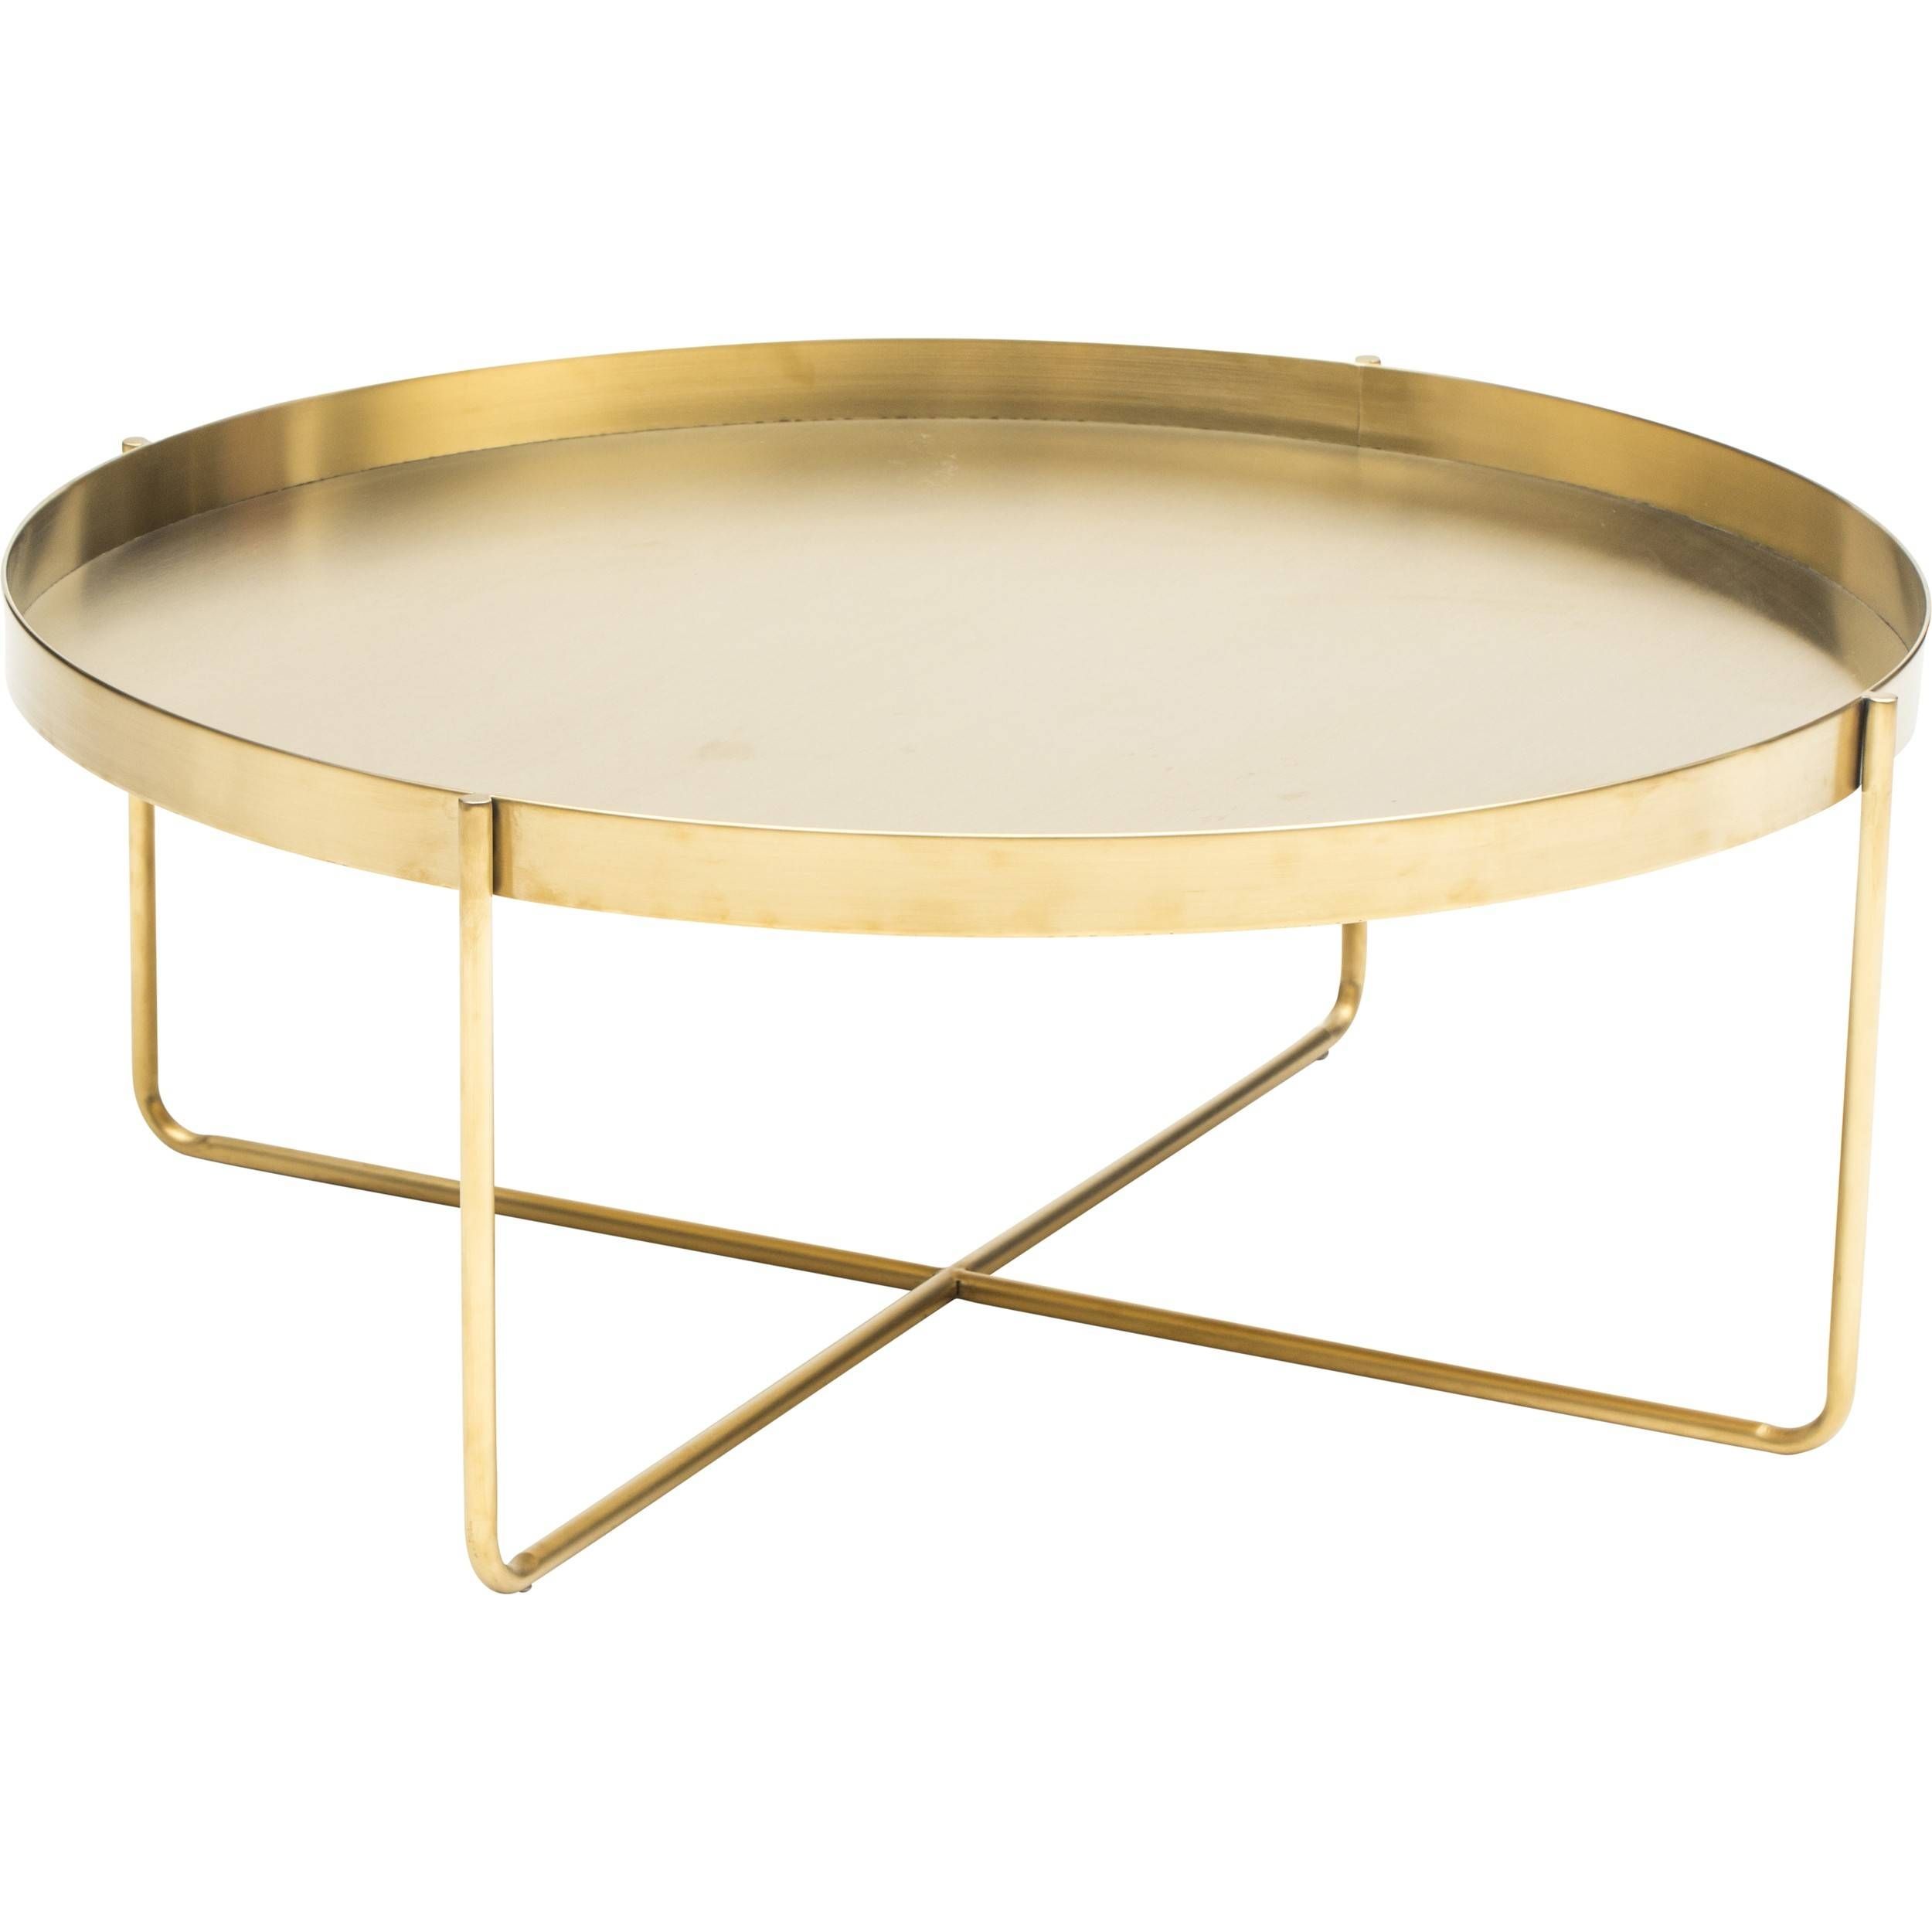 Coffee Table: Cool Round Gold Coffee Table Designs Gold And Marble With Gold Round Coffee Table (View 13 of 15)